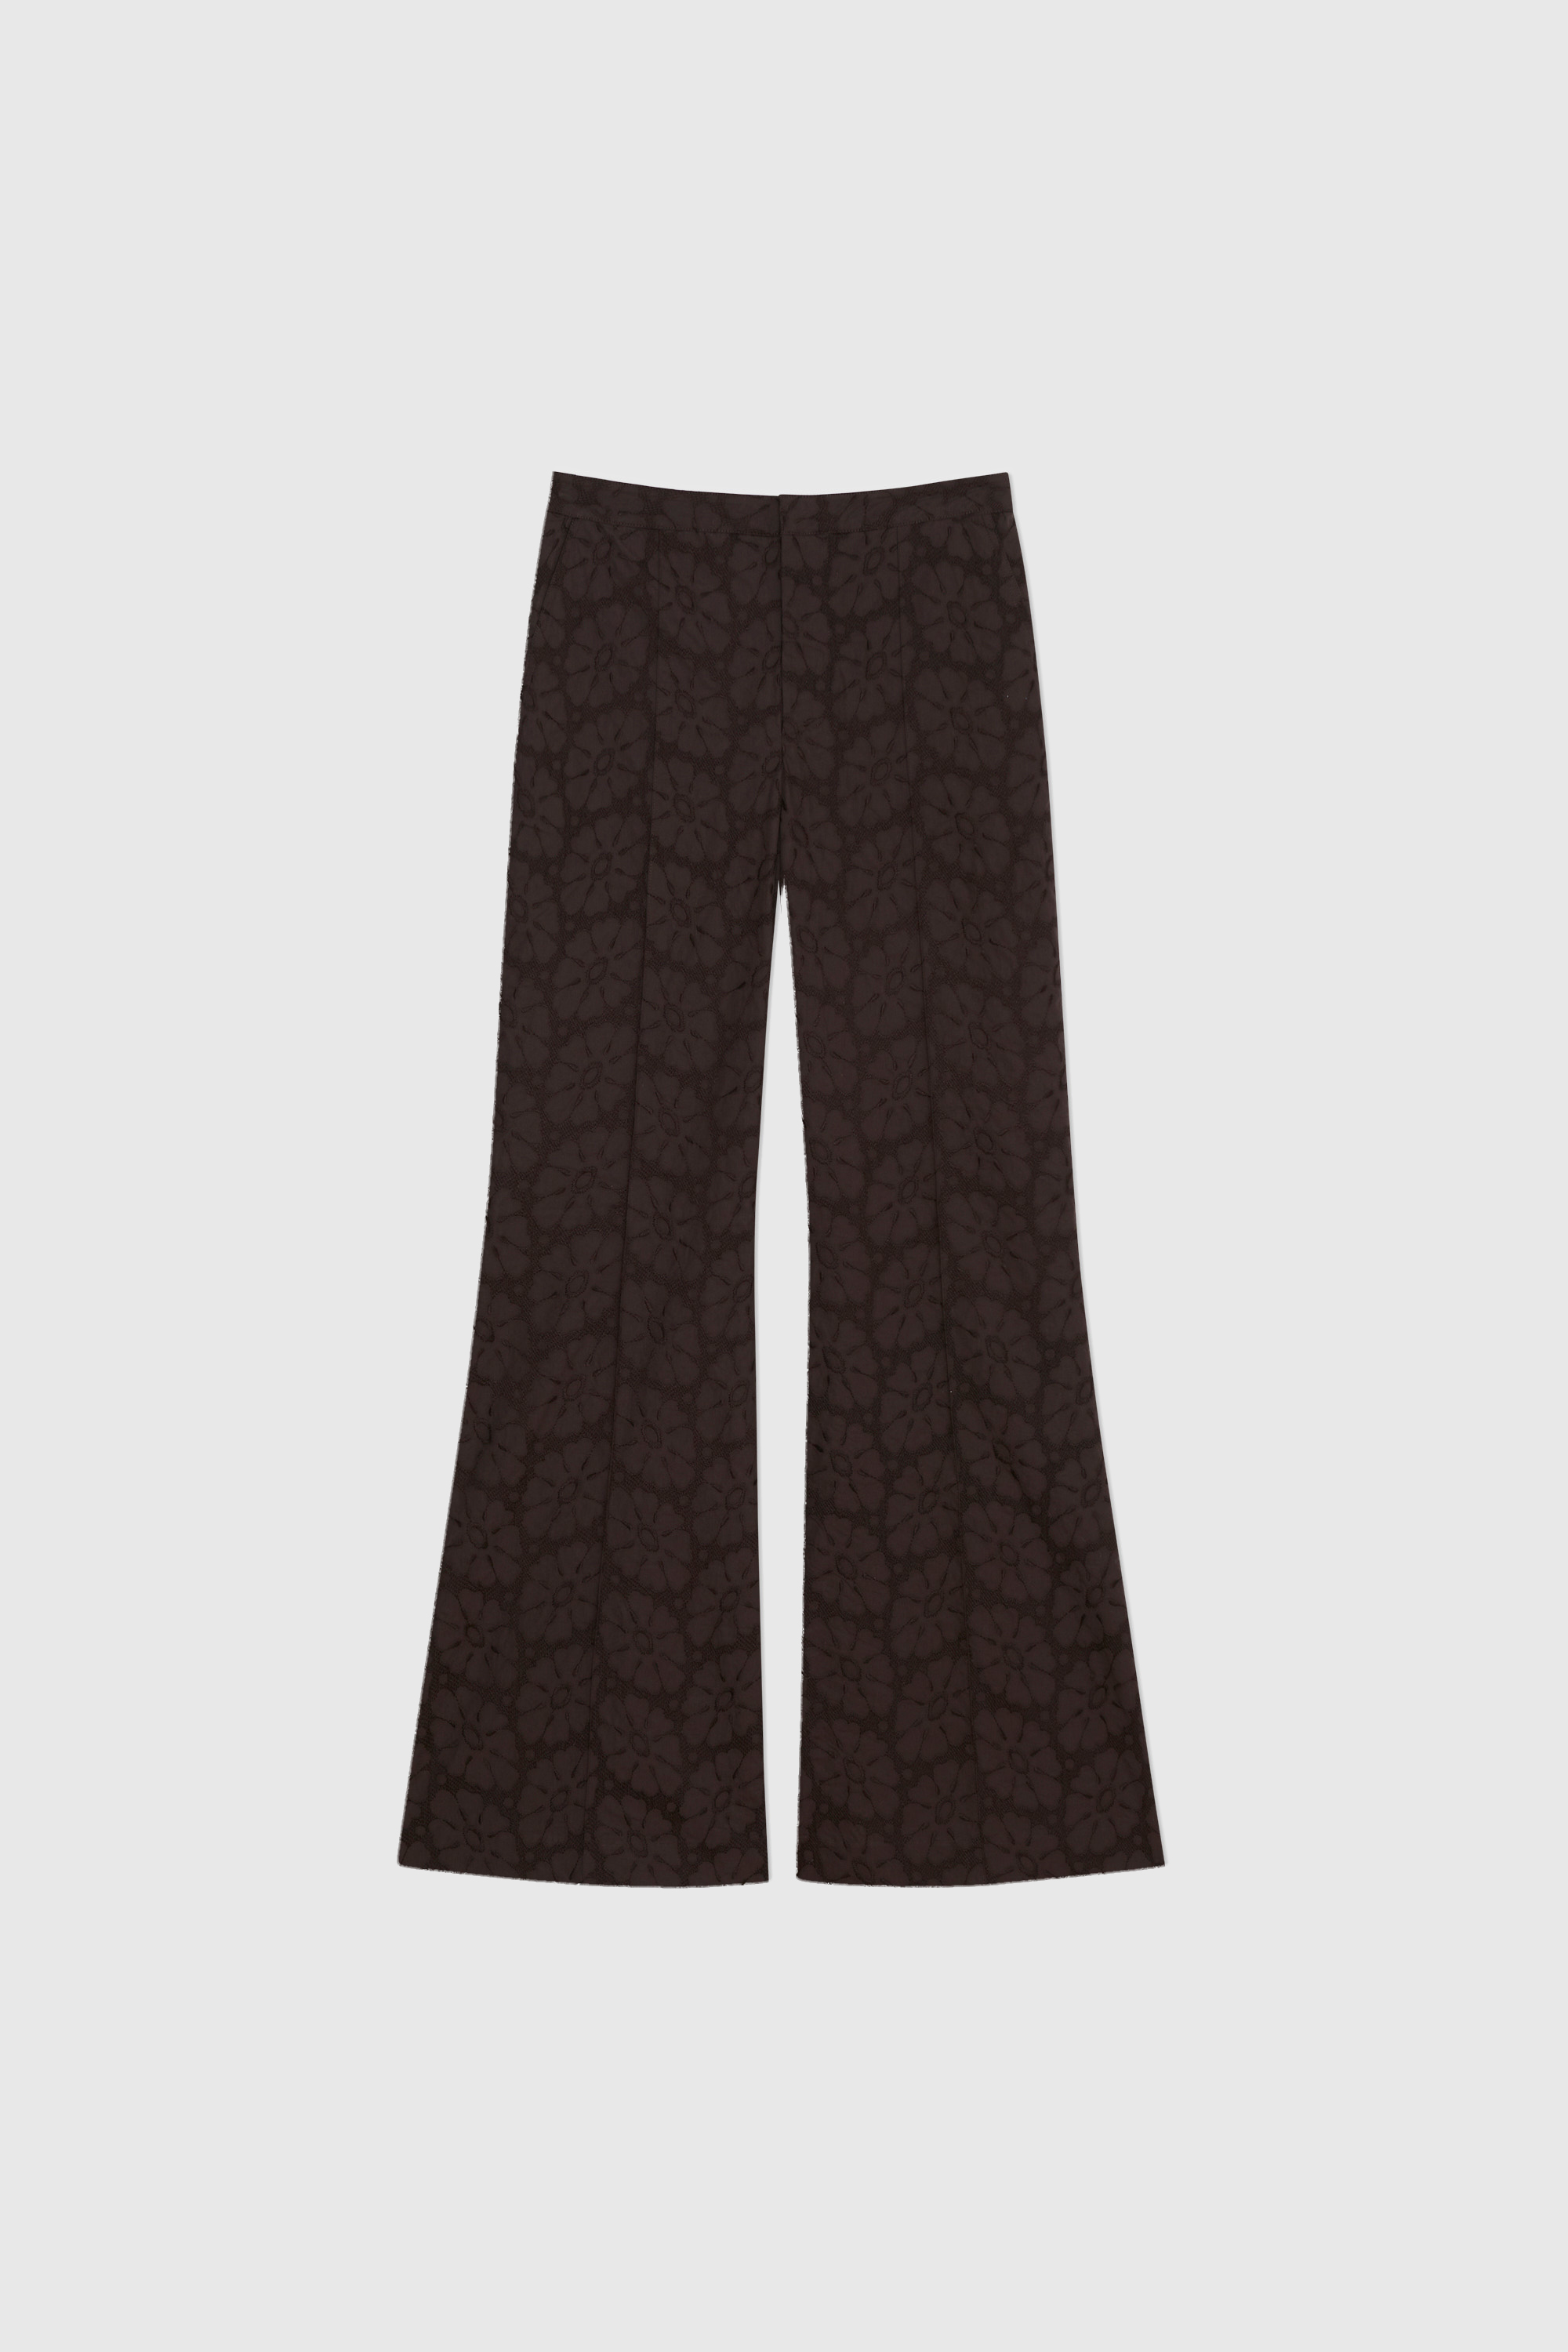 Marine Serre - MOON SPONGE JACQUARD LOUNGE PANTS  HBX - Globally Curated  Fashion and Lifestyle by Hypebeast